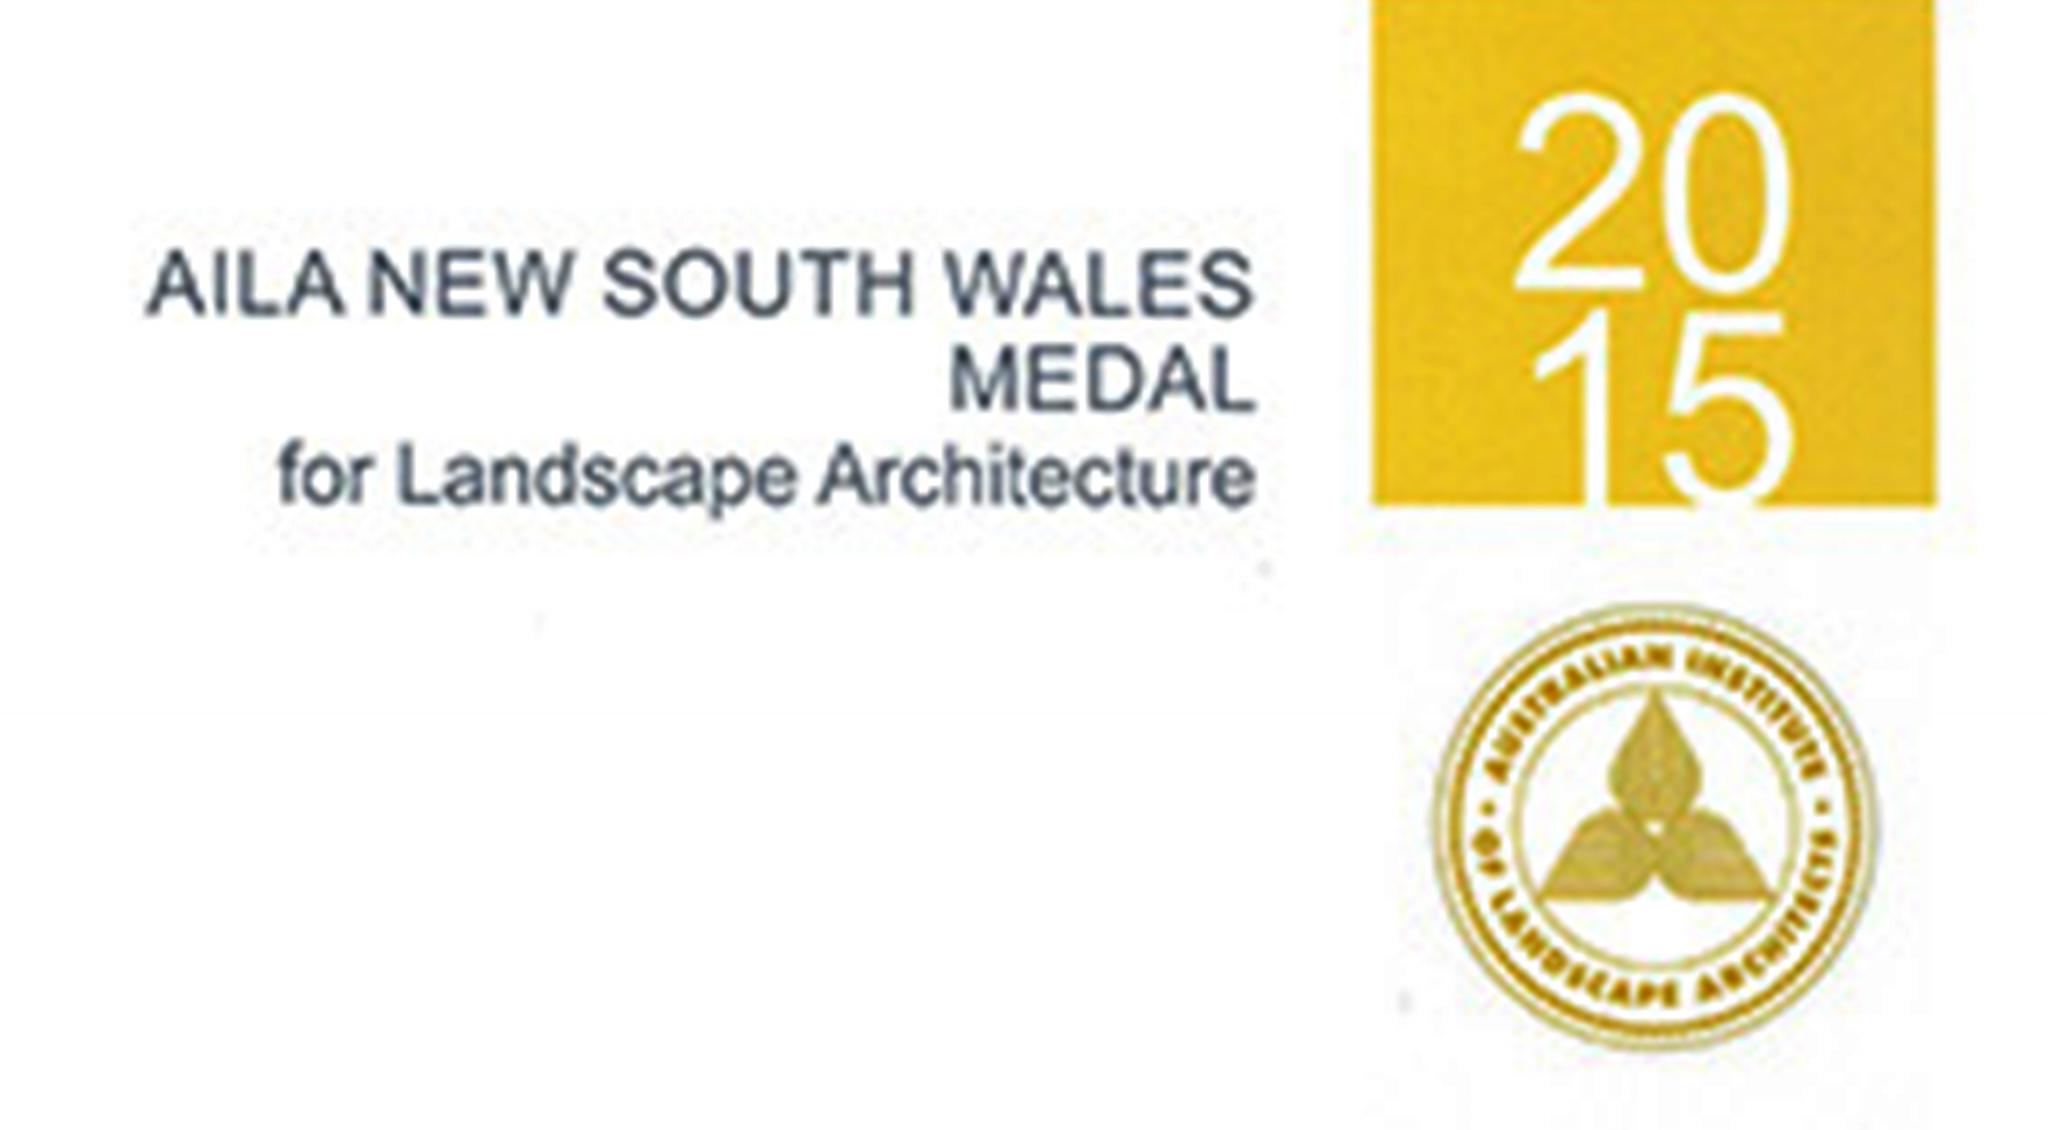 AILA NSW 2015 Medal for Landscape Architecture